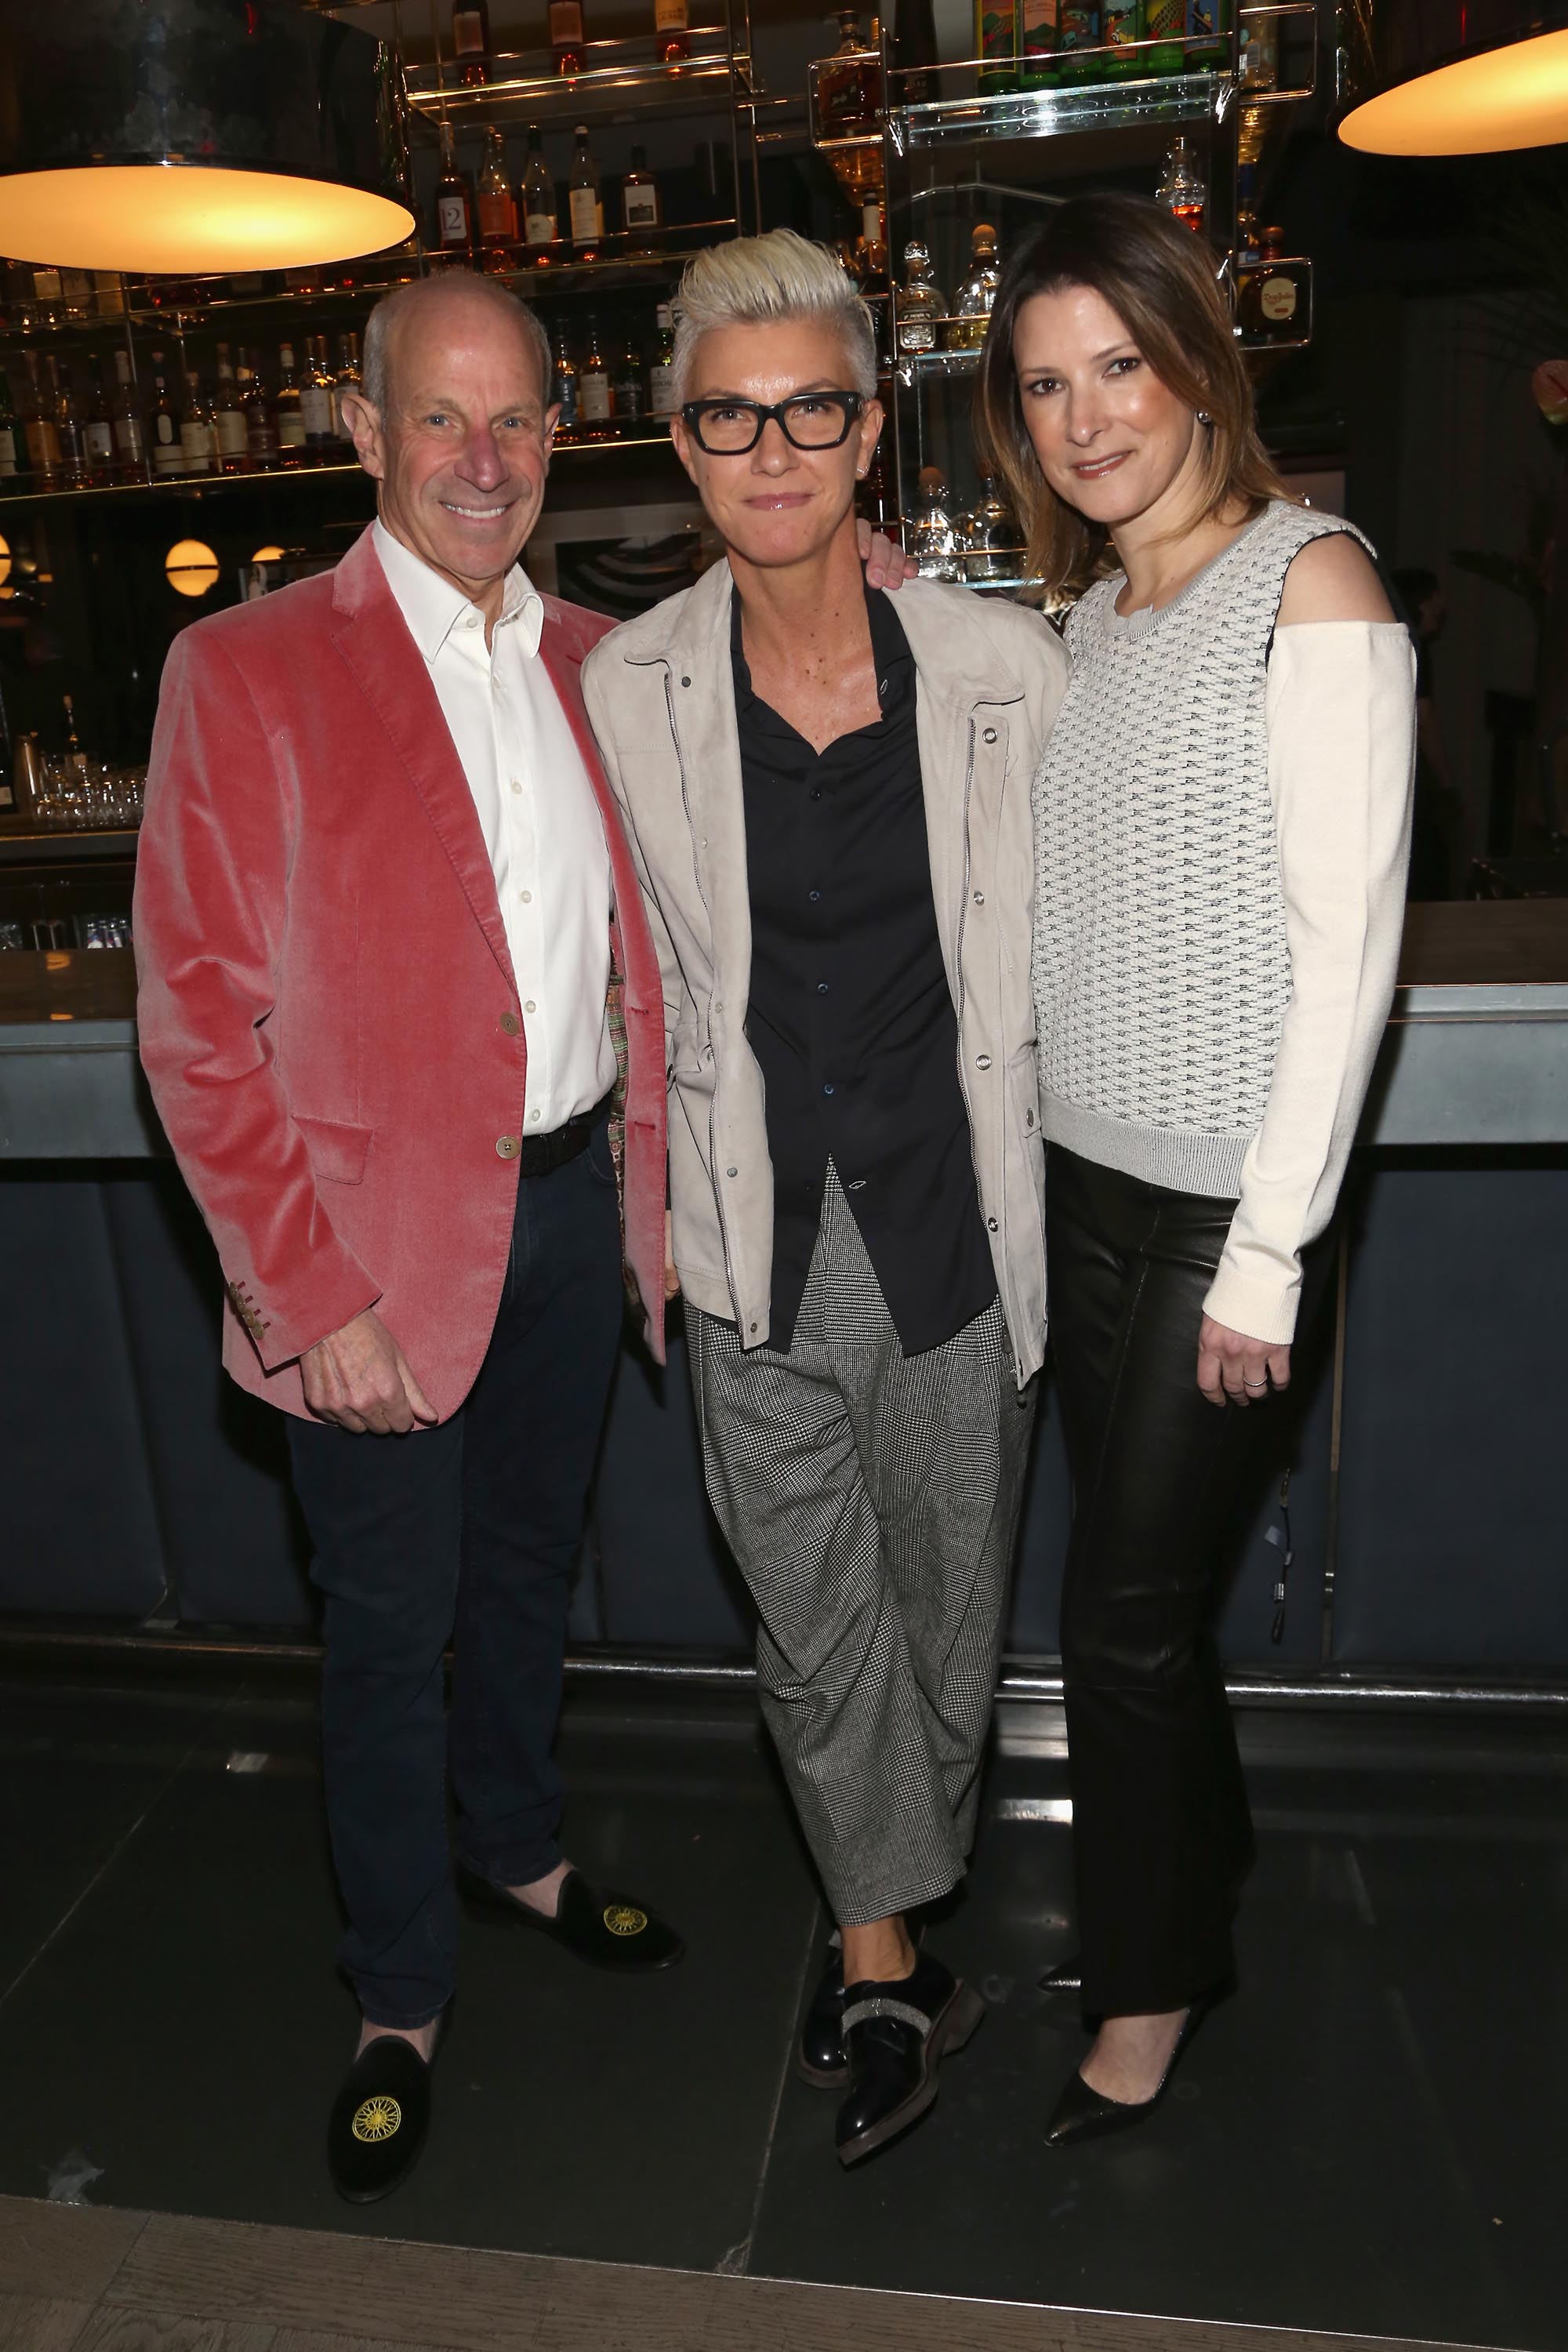 Lizzie Tisch attends the Two Turns From Zero Book Launch Event